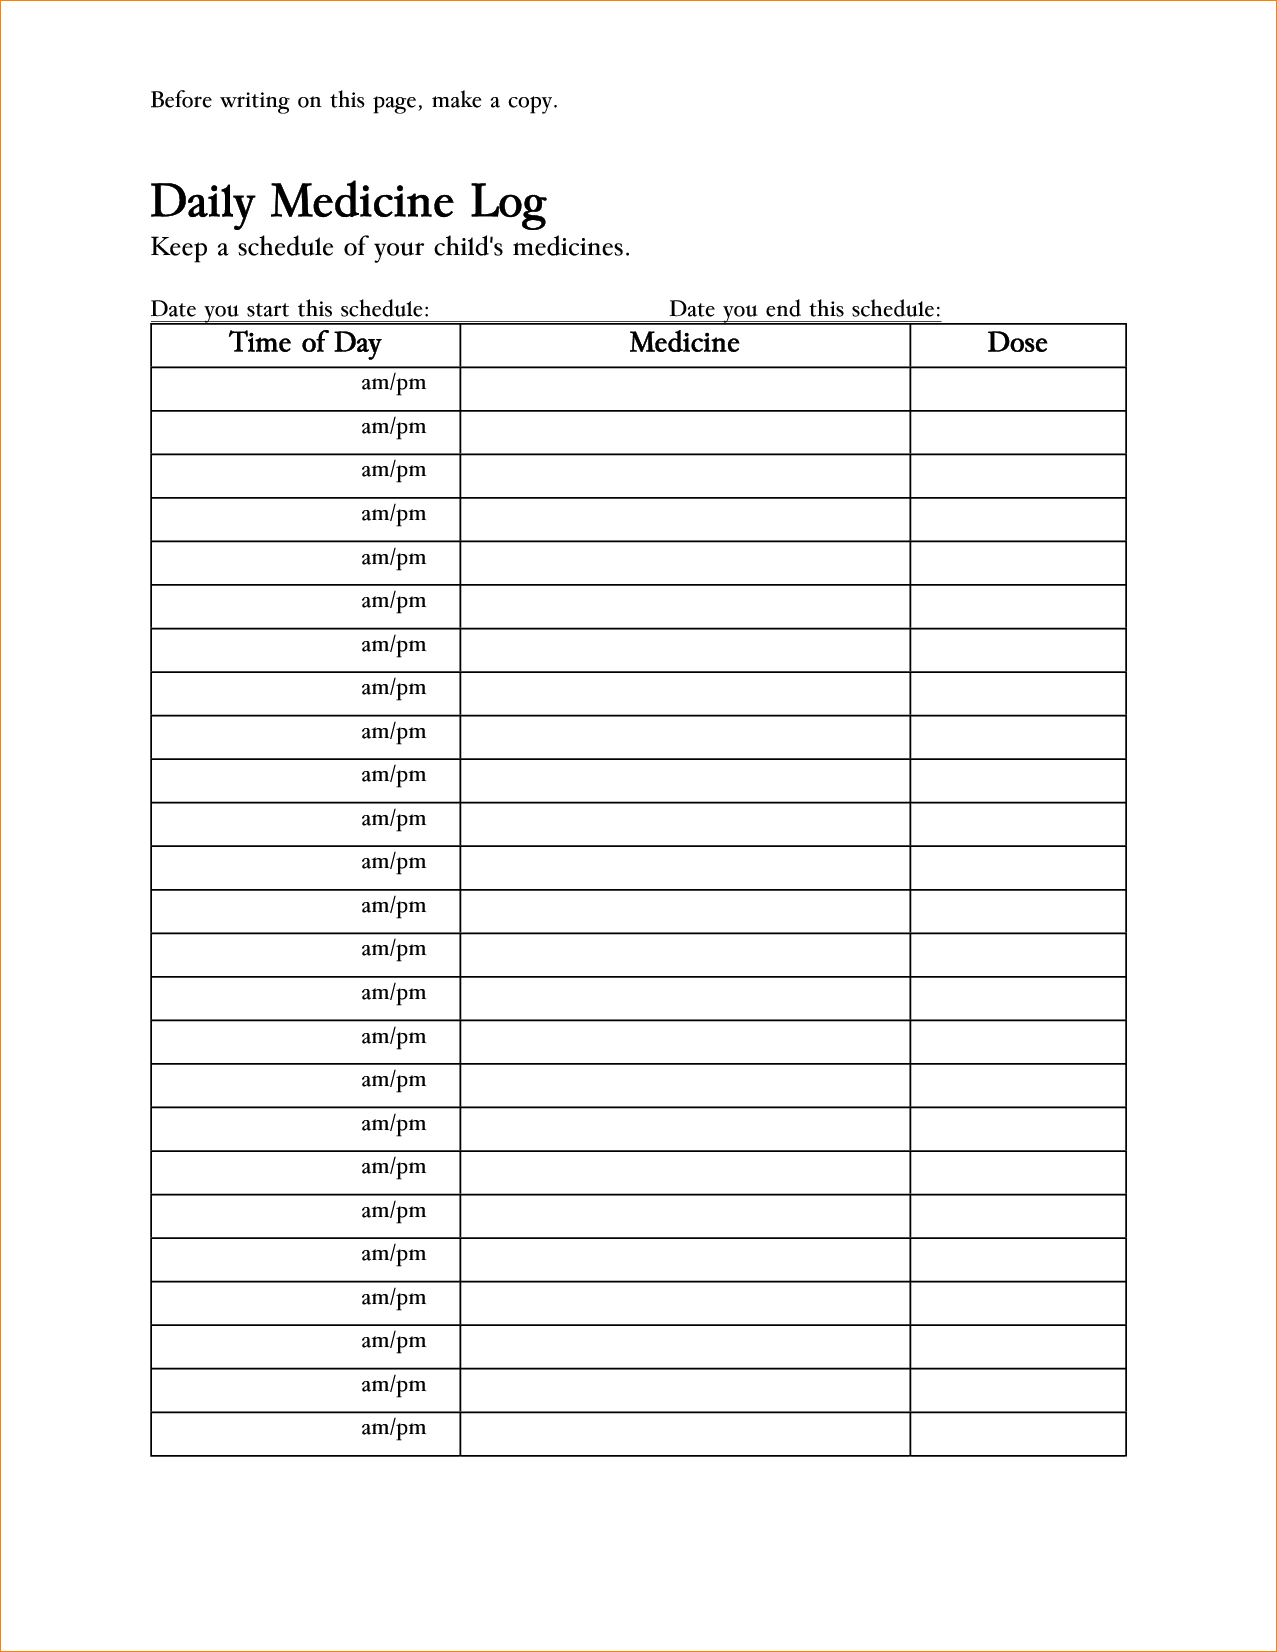 Free Medication Administration Record Template Excel - Yahoo Image - Free Printable Medical Chart Forms